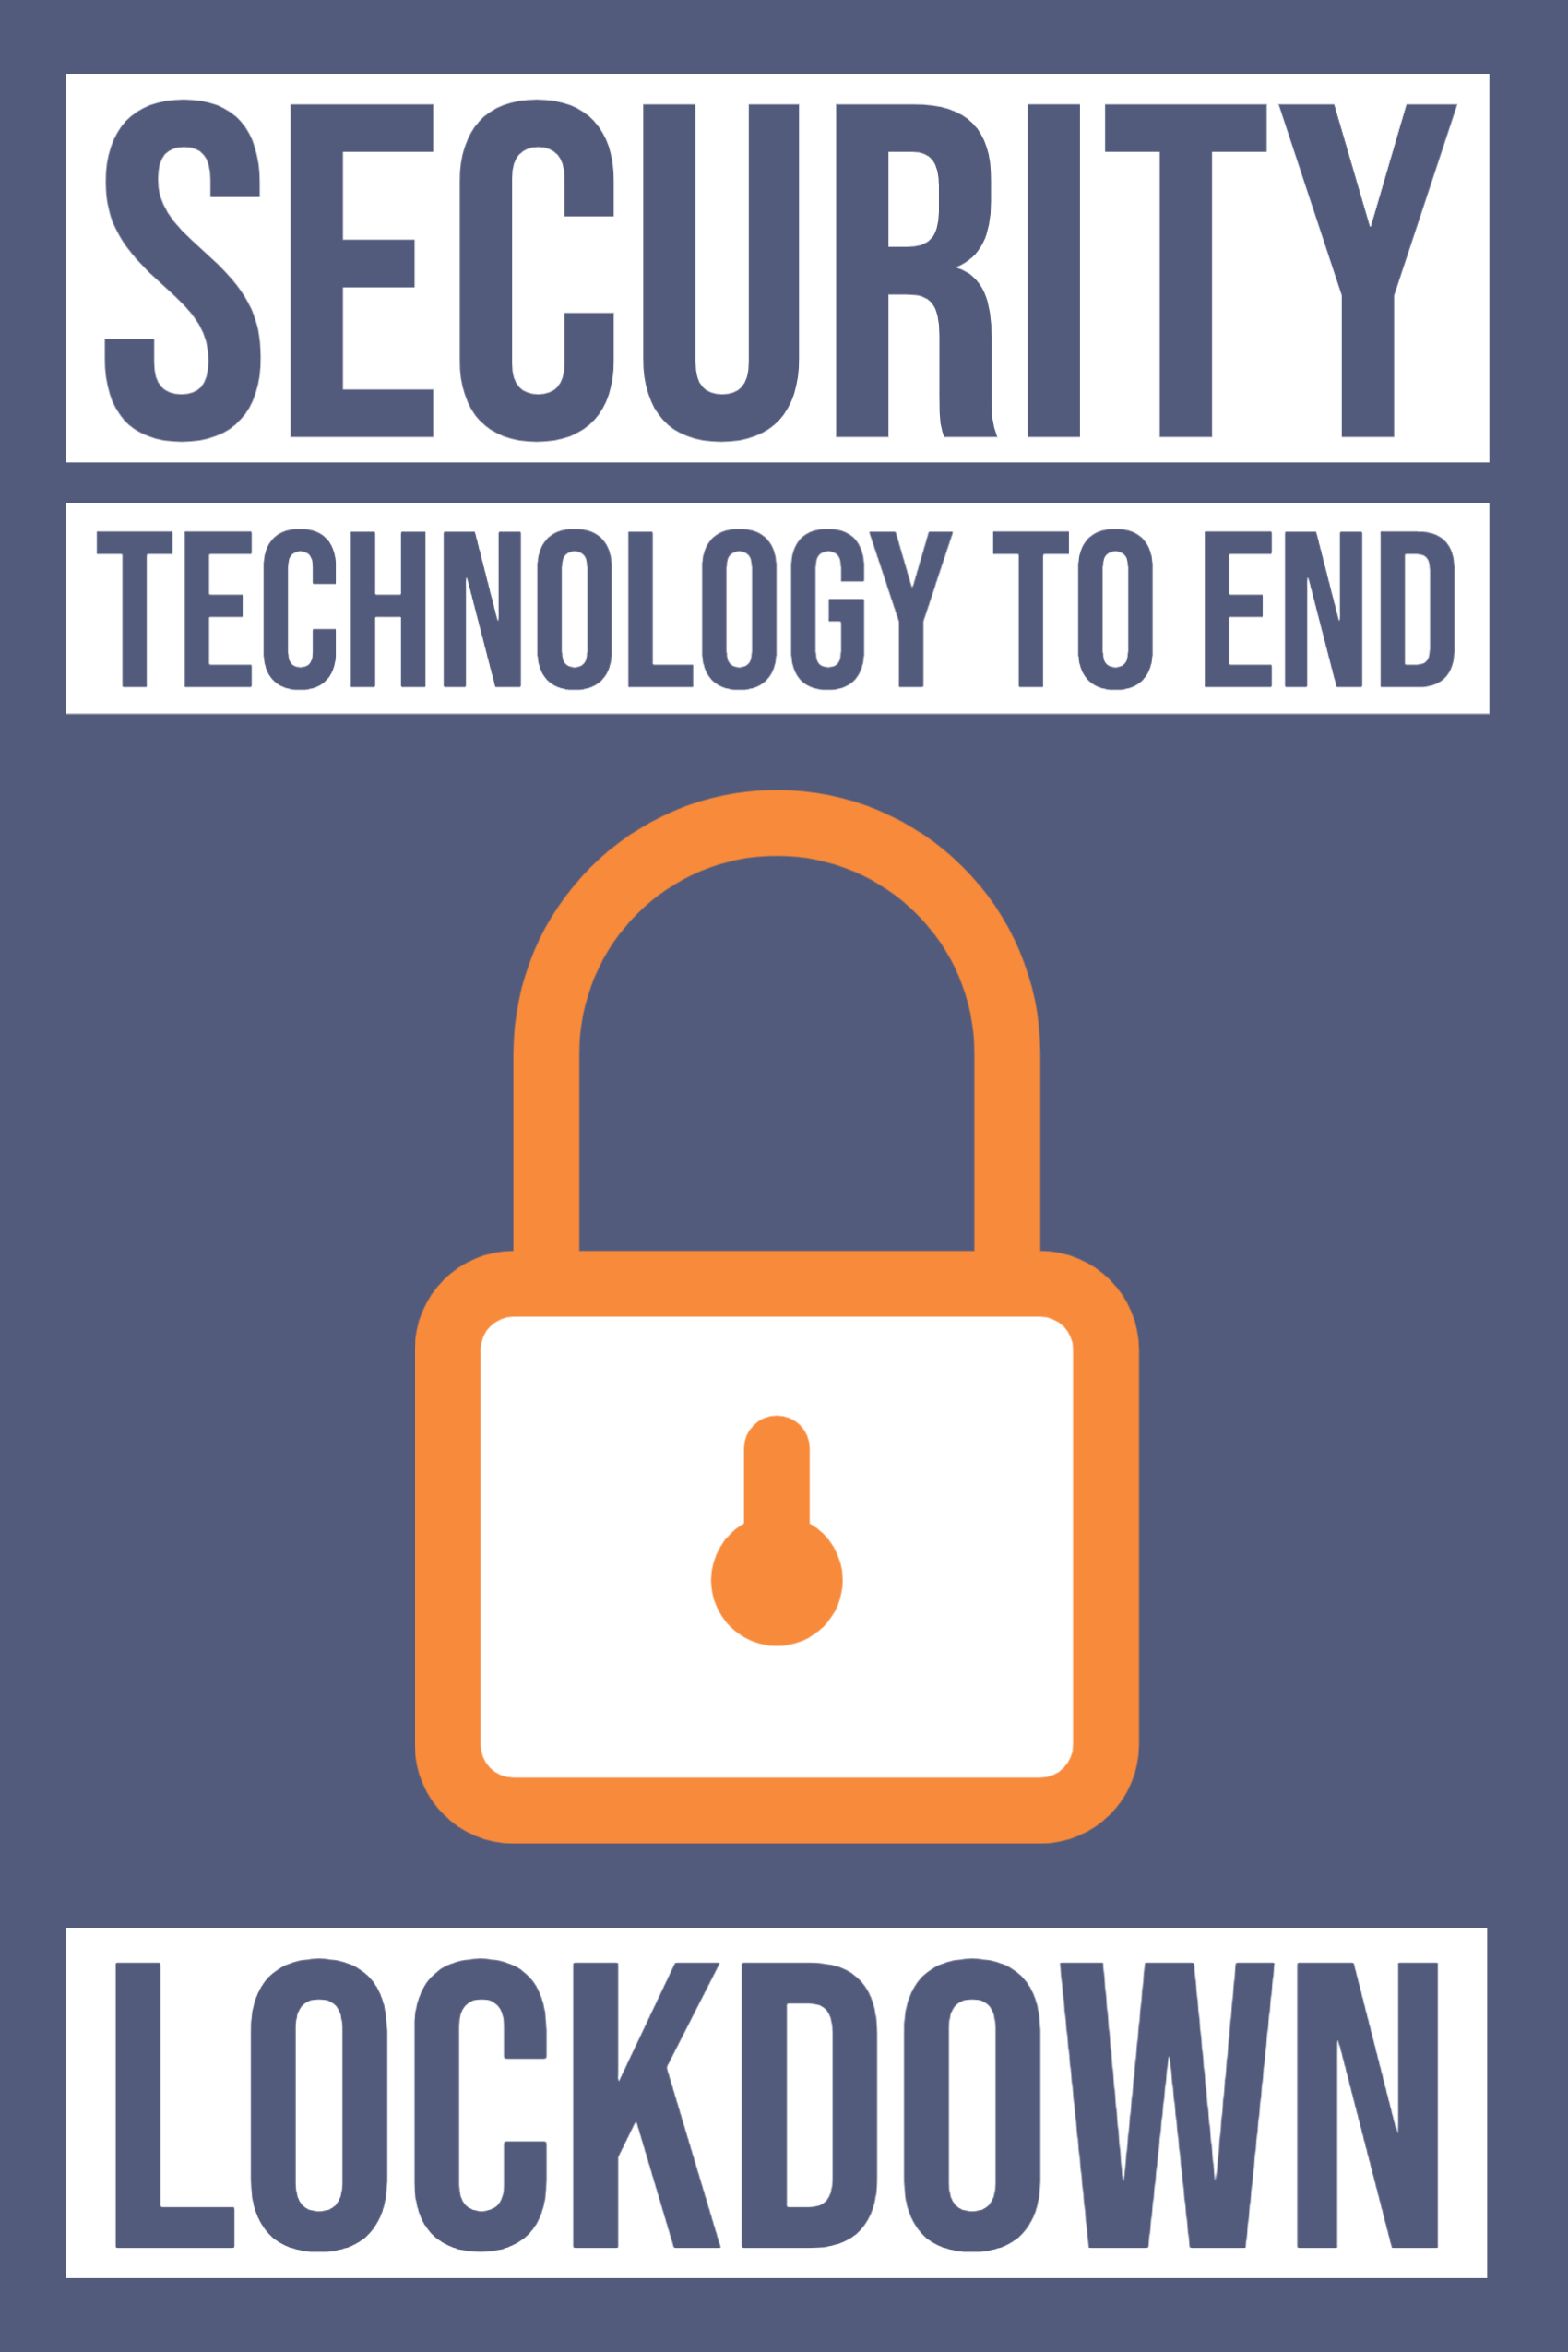 Security technology can help end lockdown